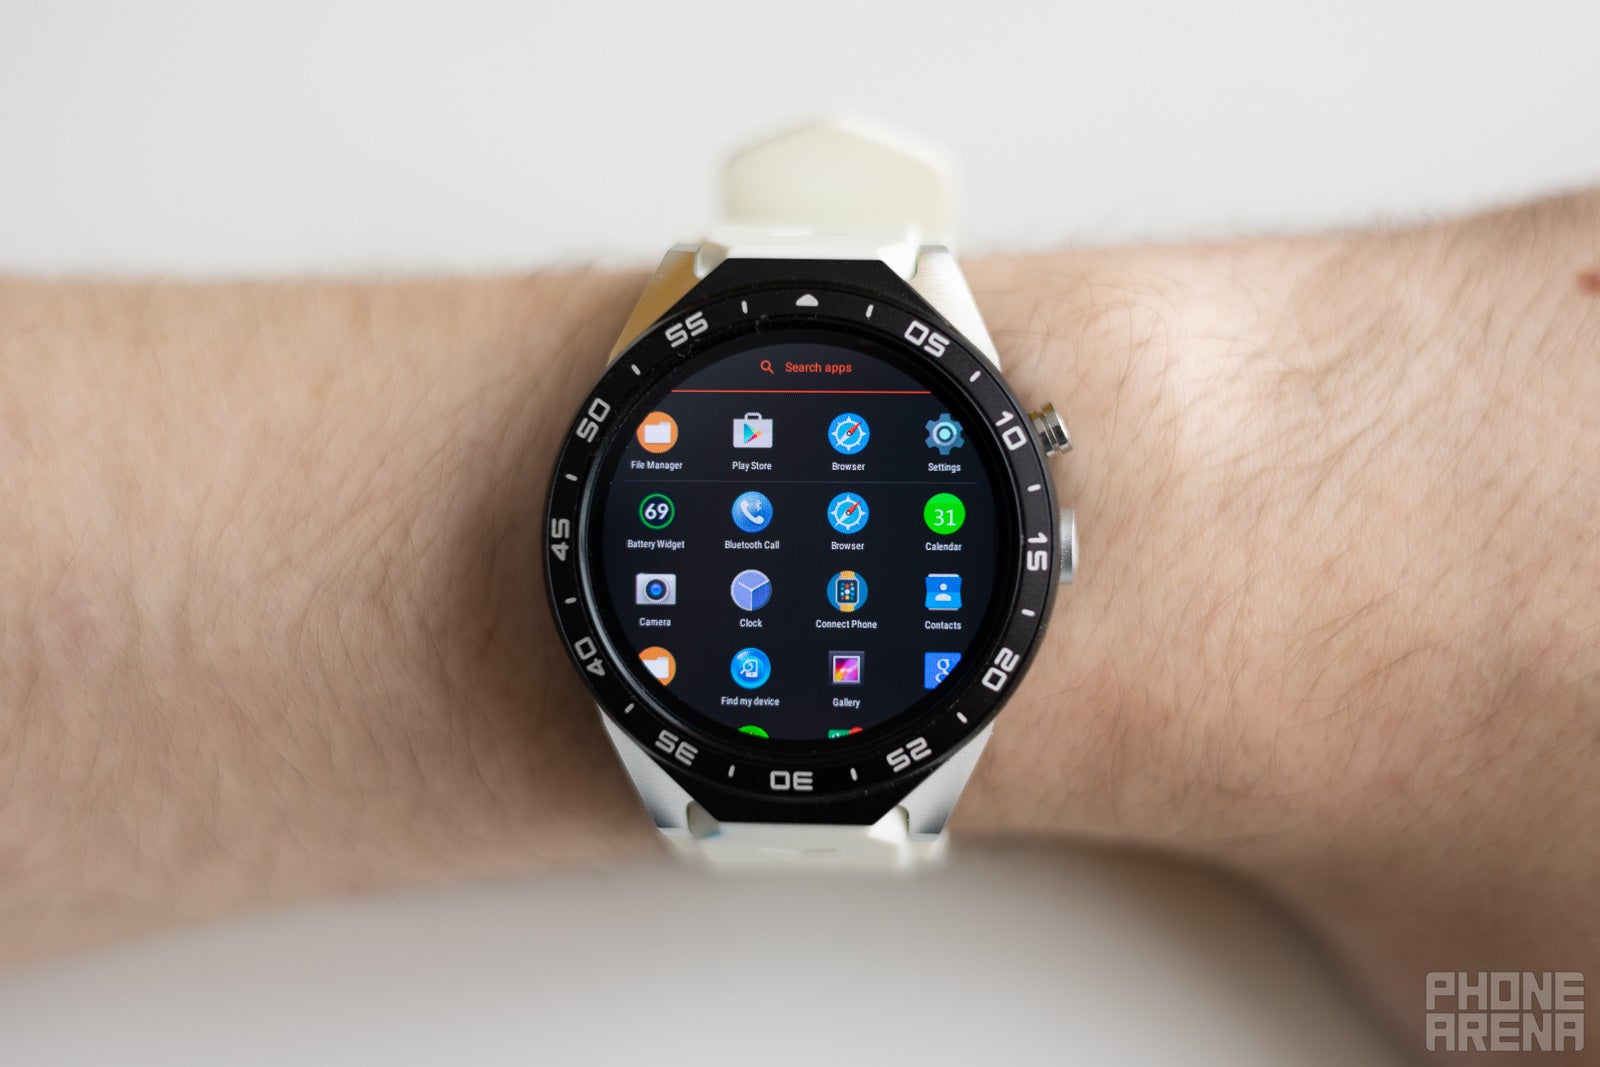 Have you ever seen an Android app drawer on anything other than a phone or a tablet? - Full Android on a smartwatch: ridiculous or awesome?